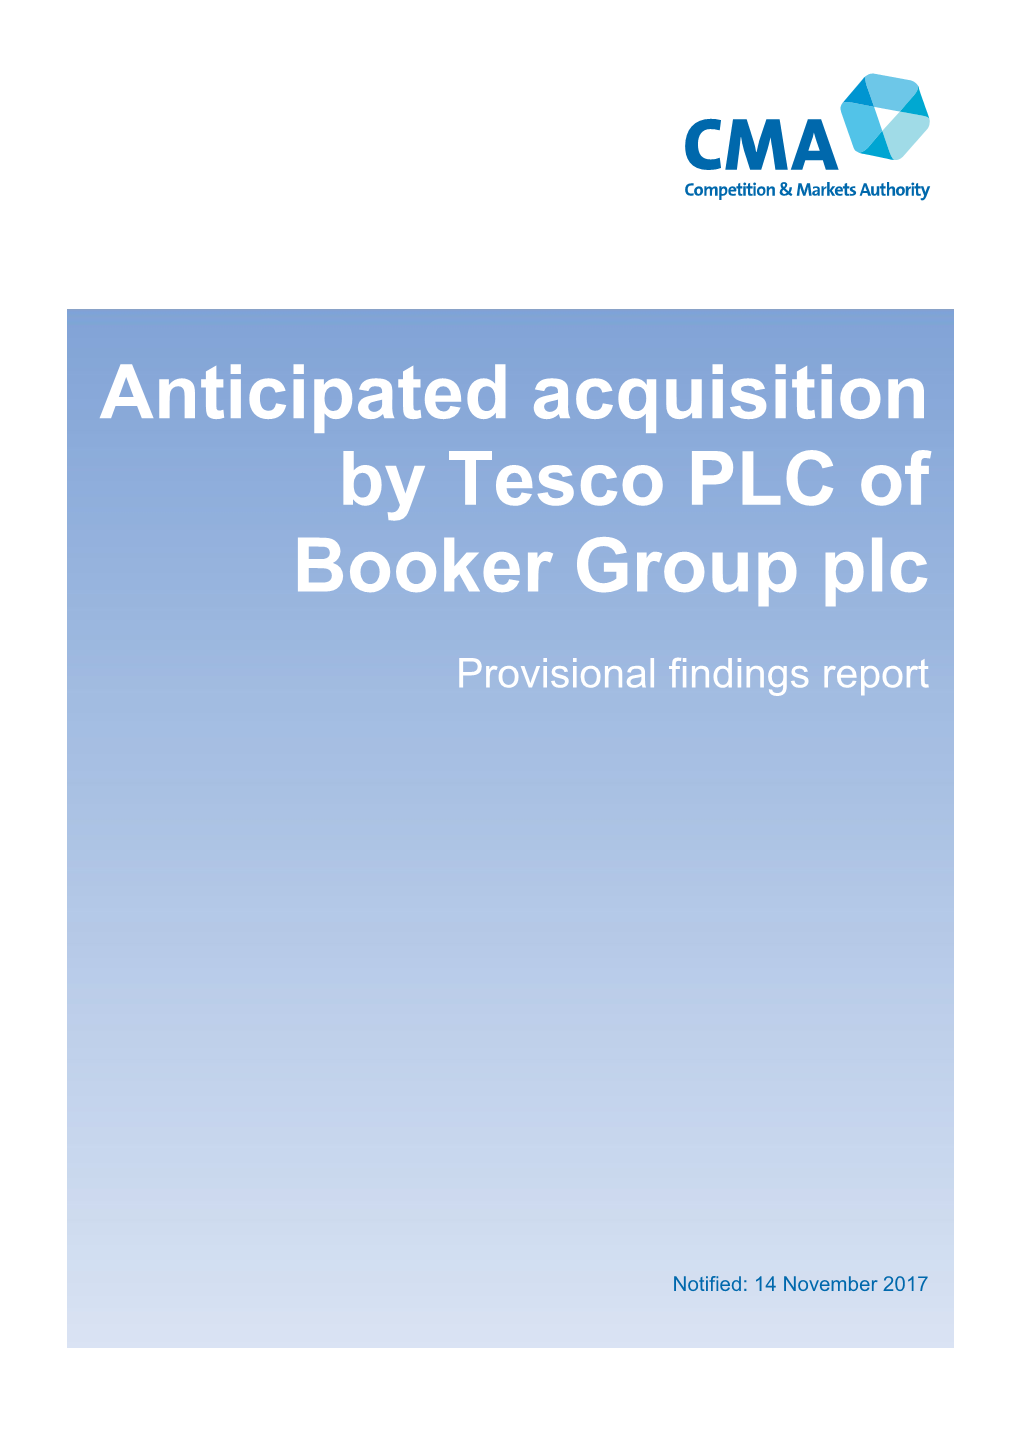 Anticipated Acquisition by Tesco PLC of Booker Group Plc: Provisional